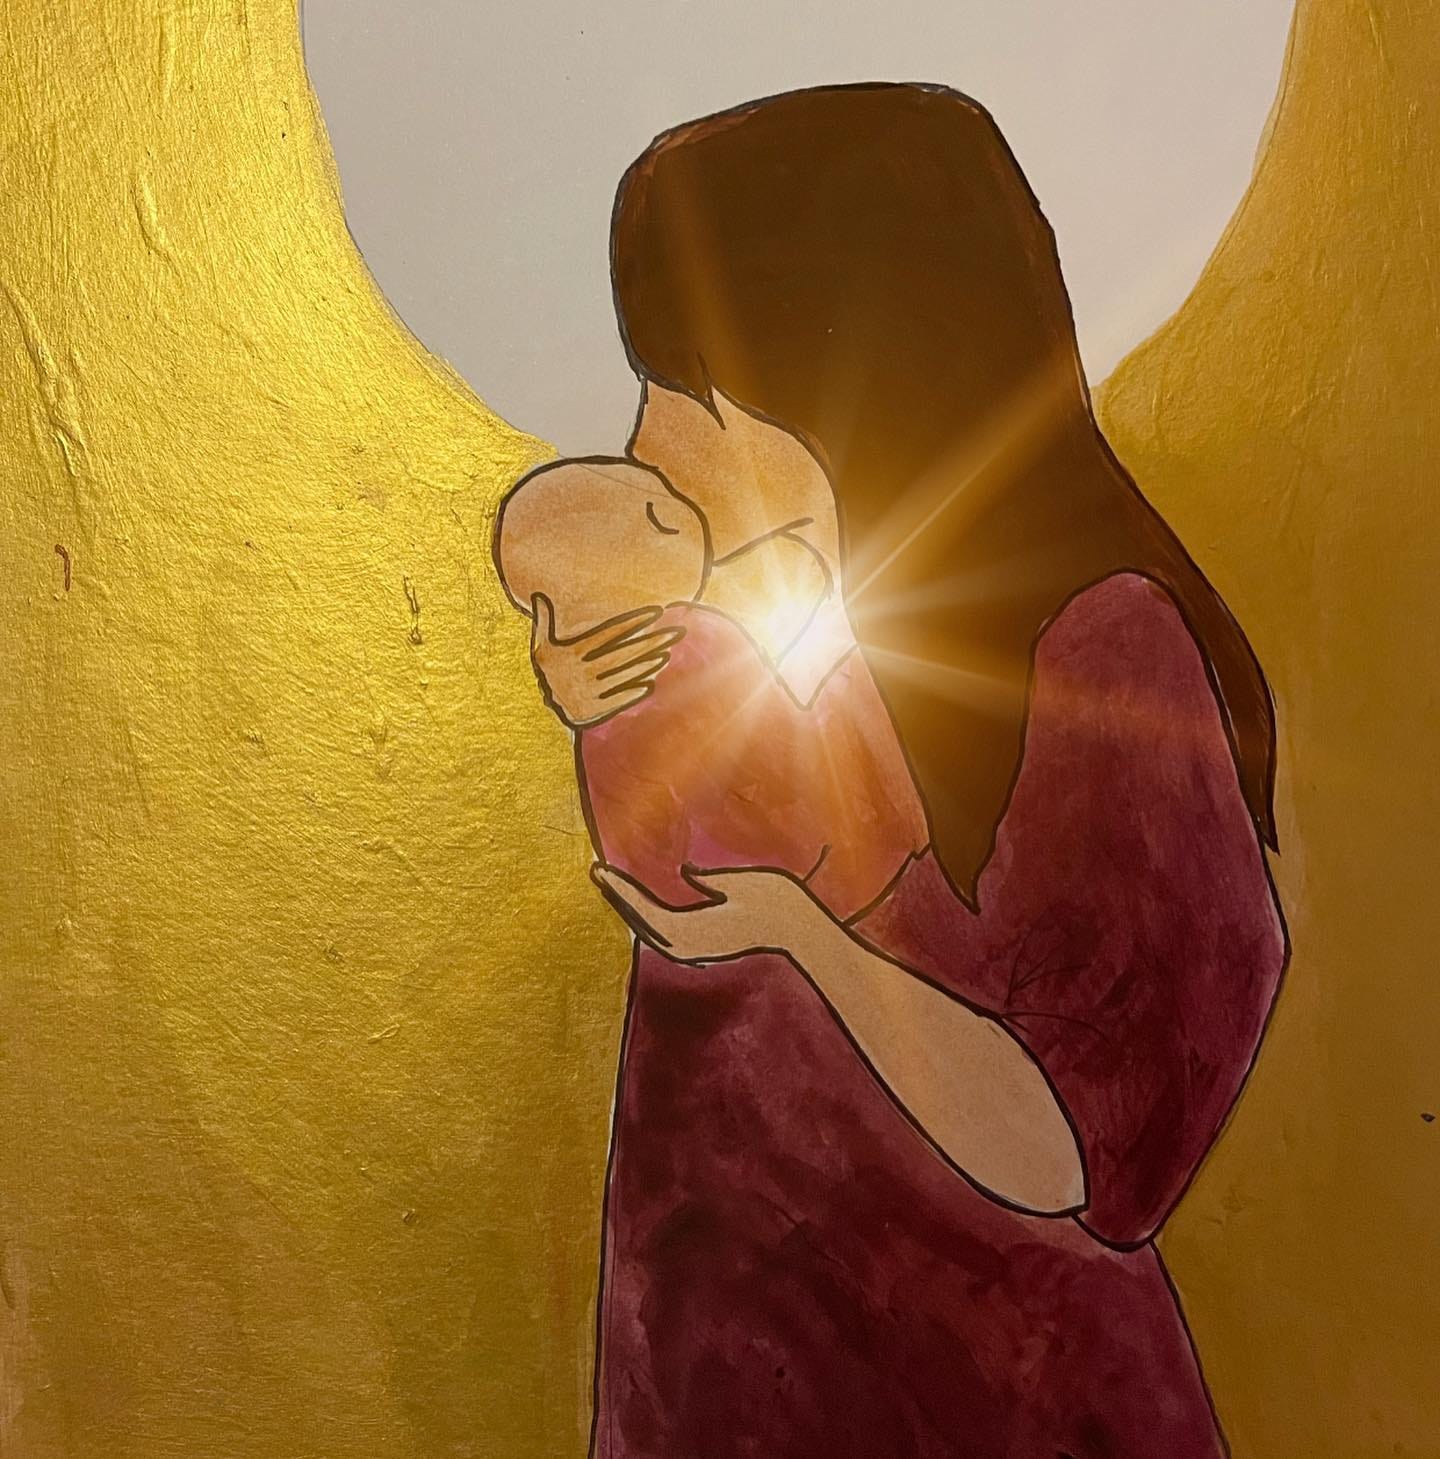 mother kissing newborn with glowing light behind them